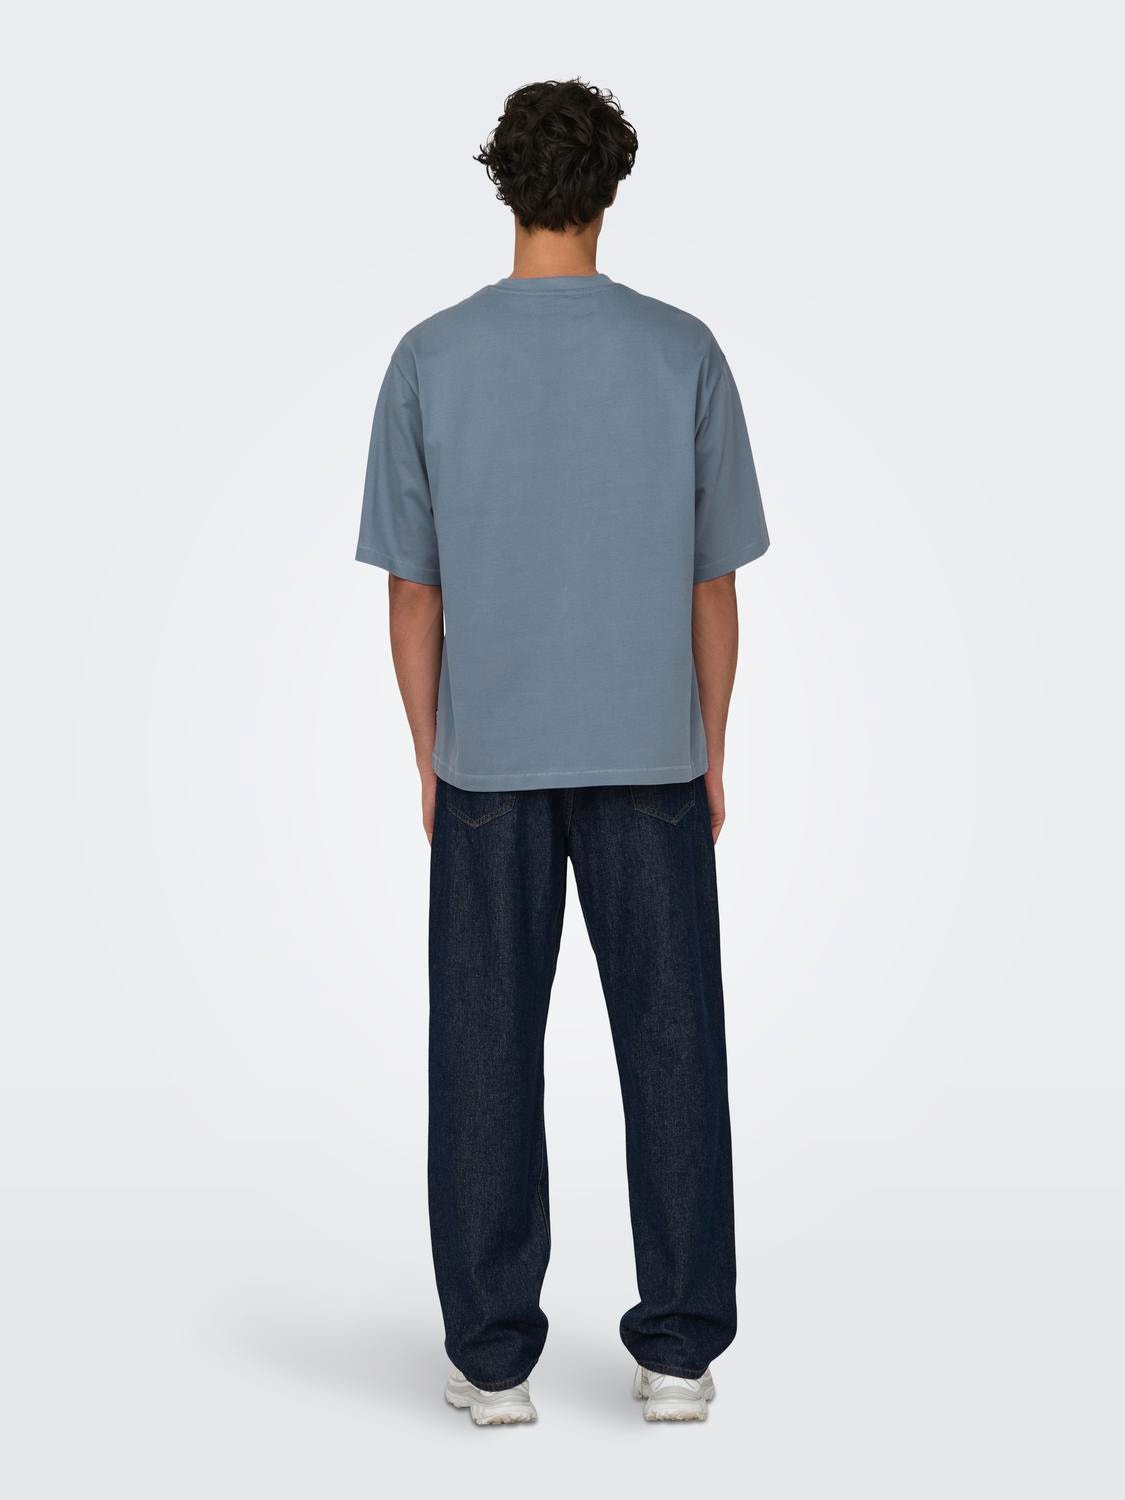 ONLY & SONS O-neck t-shirt -Flint Stone - 22027787